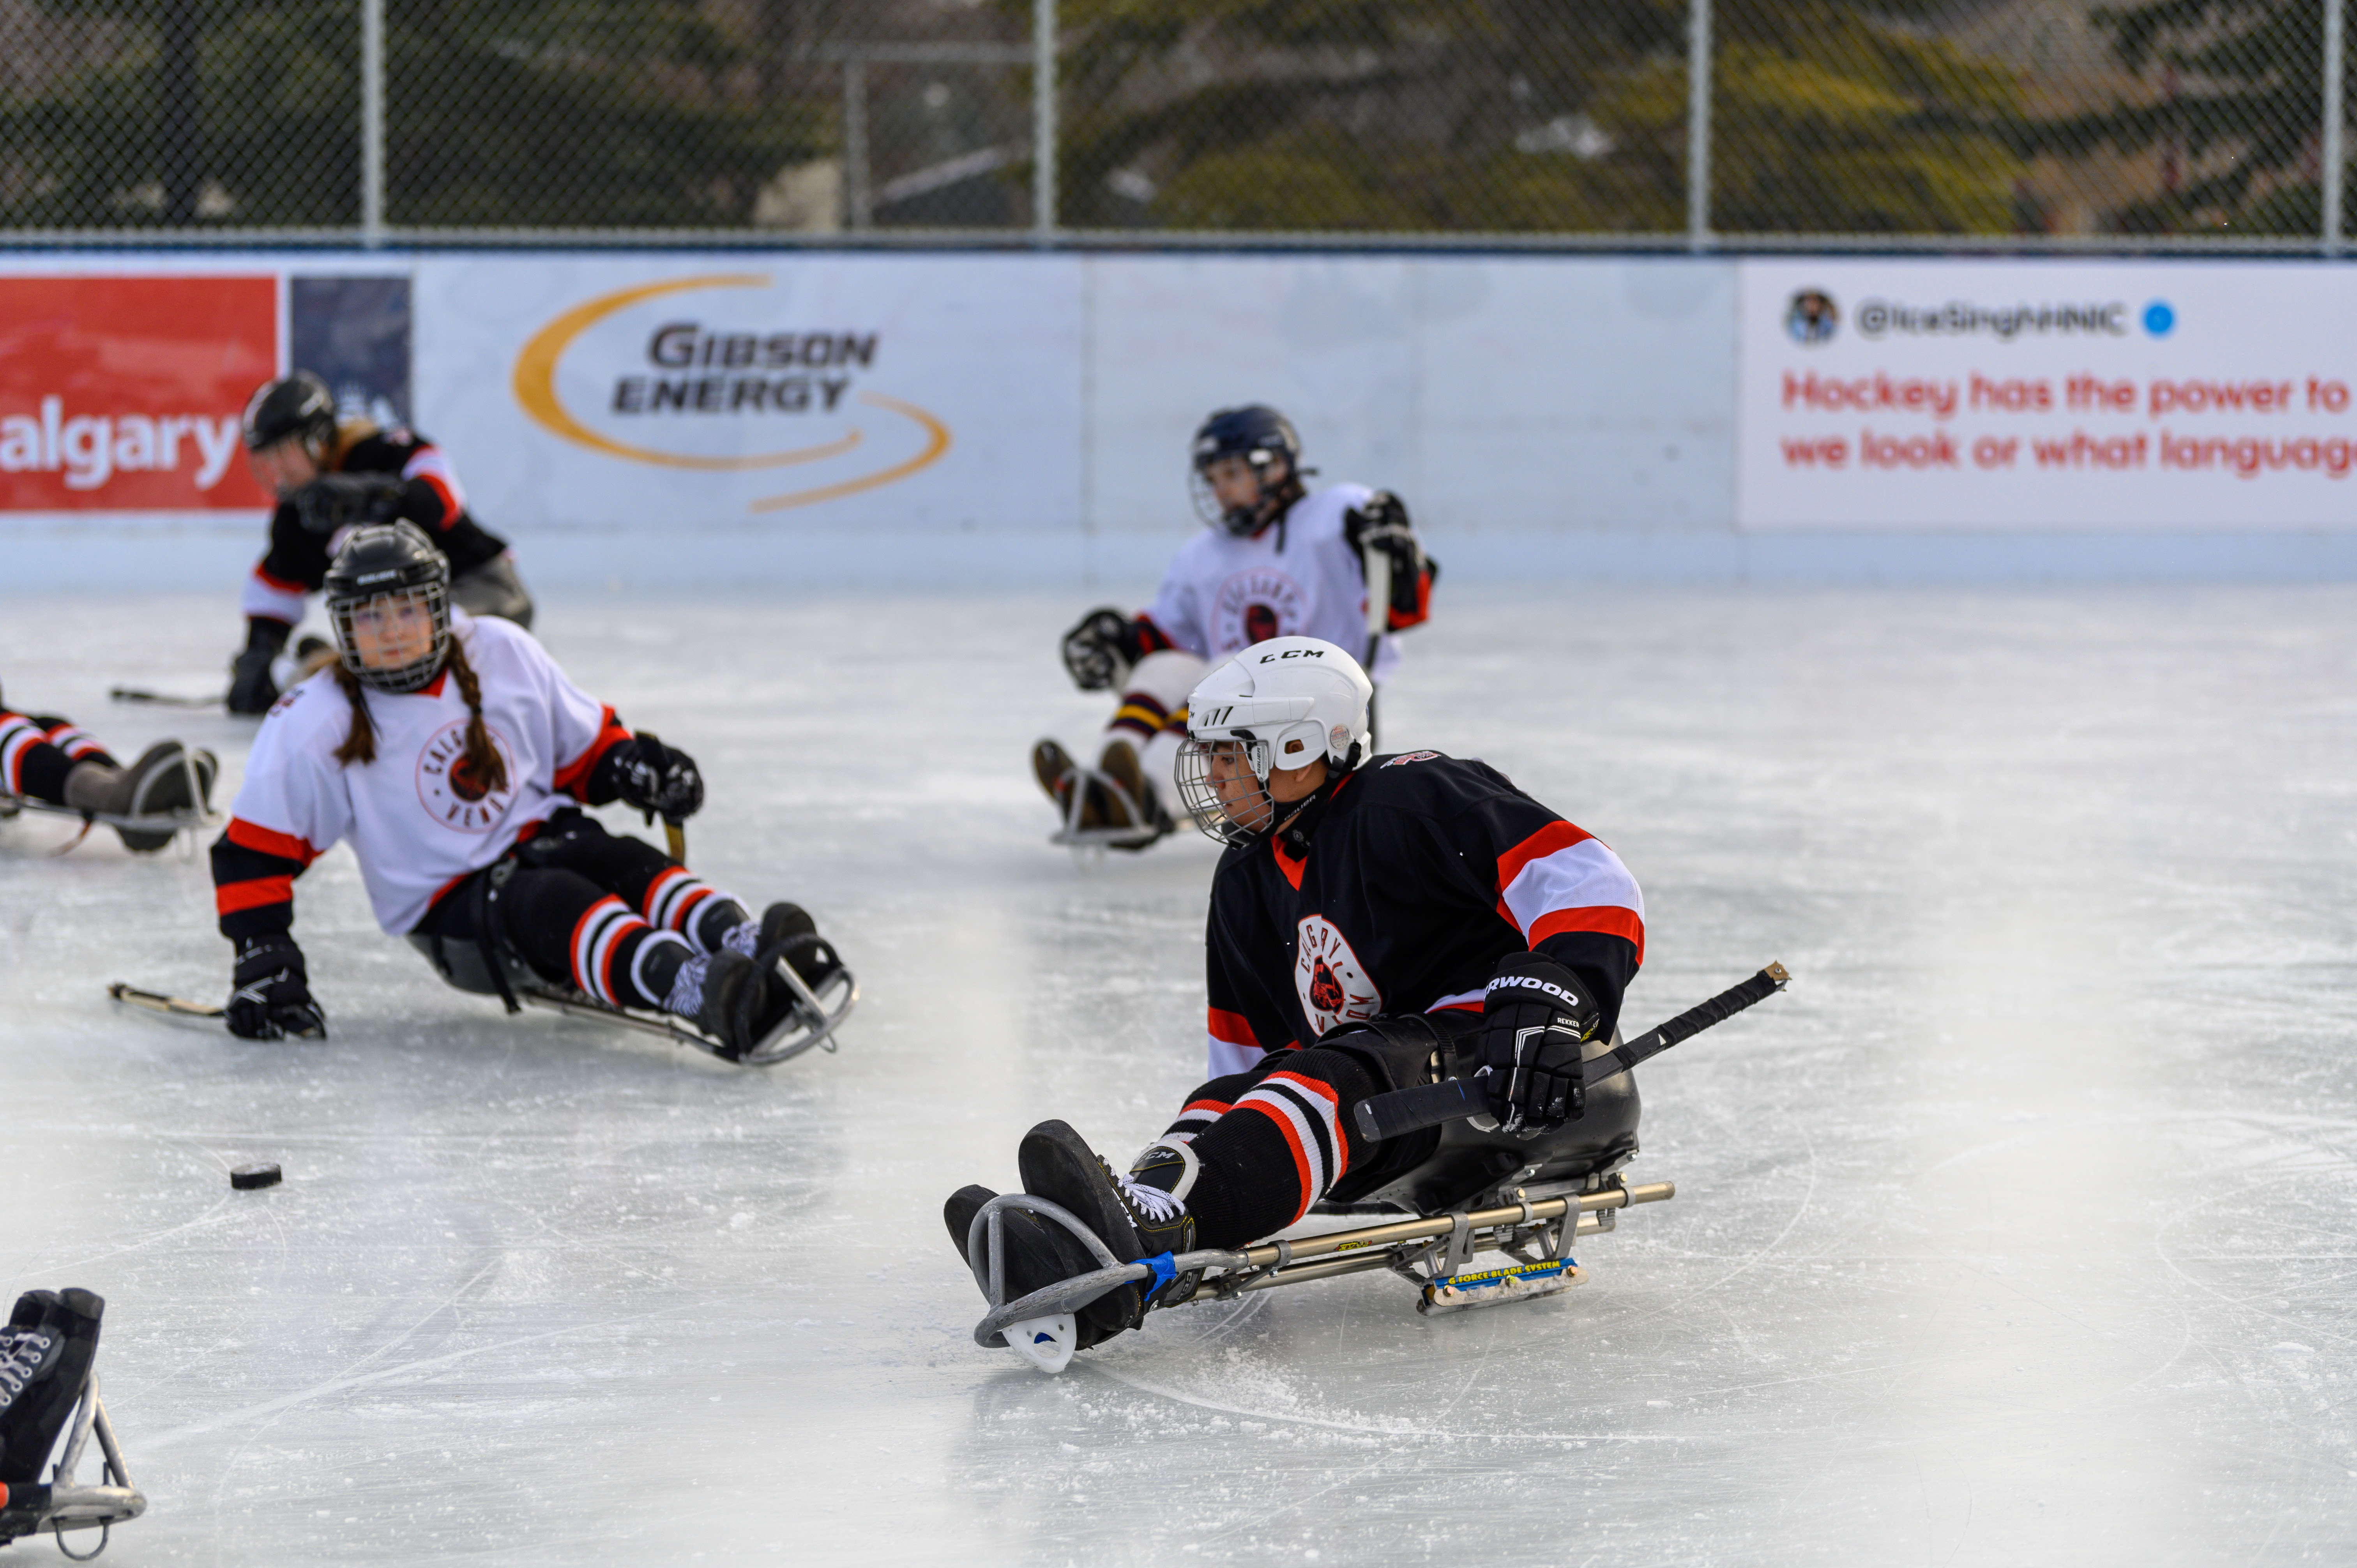 People playing sledge hockey. One team is wearing black jerseys and the other team is wearing white jerseys.